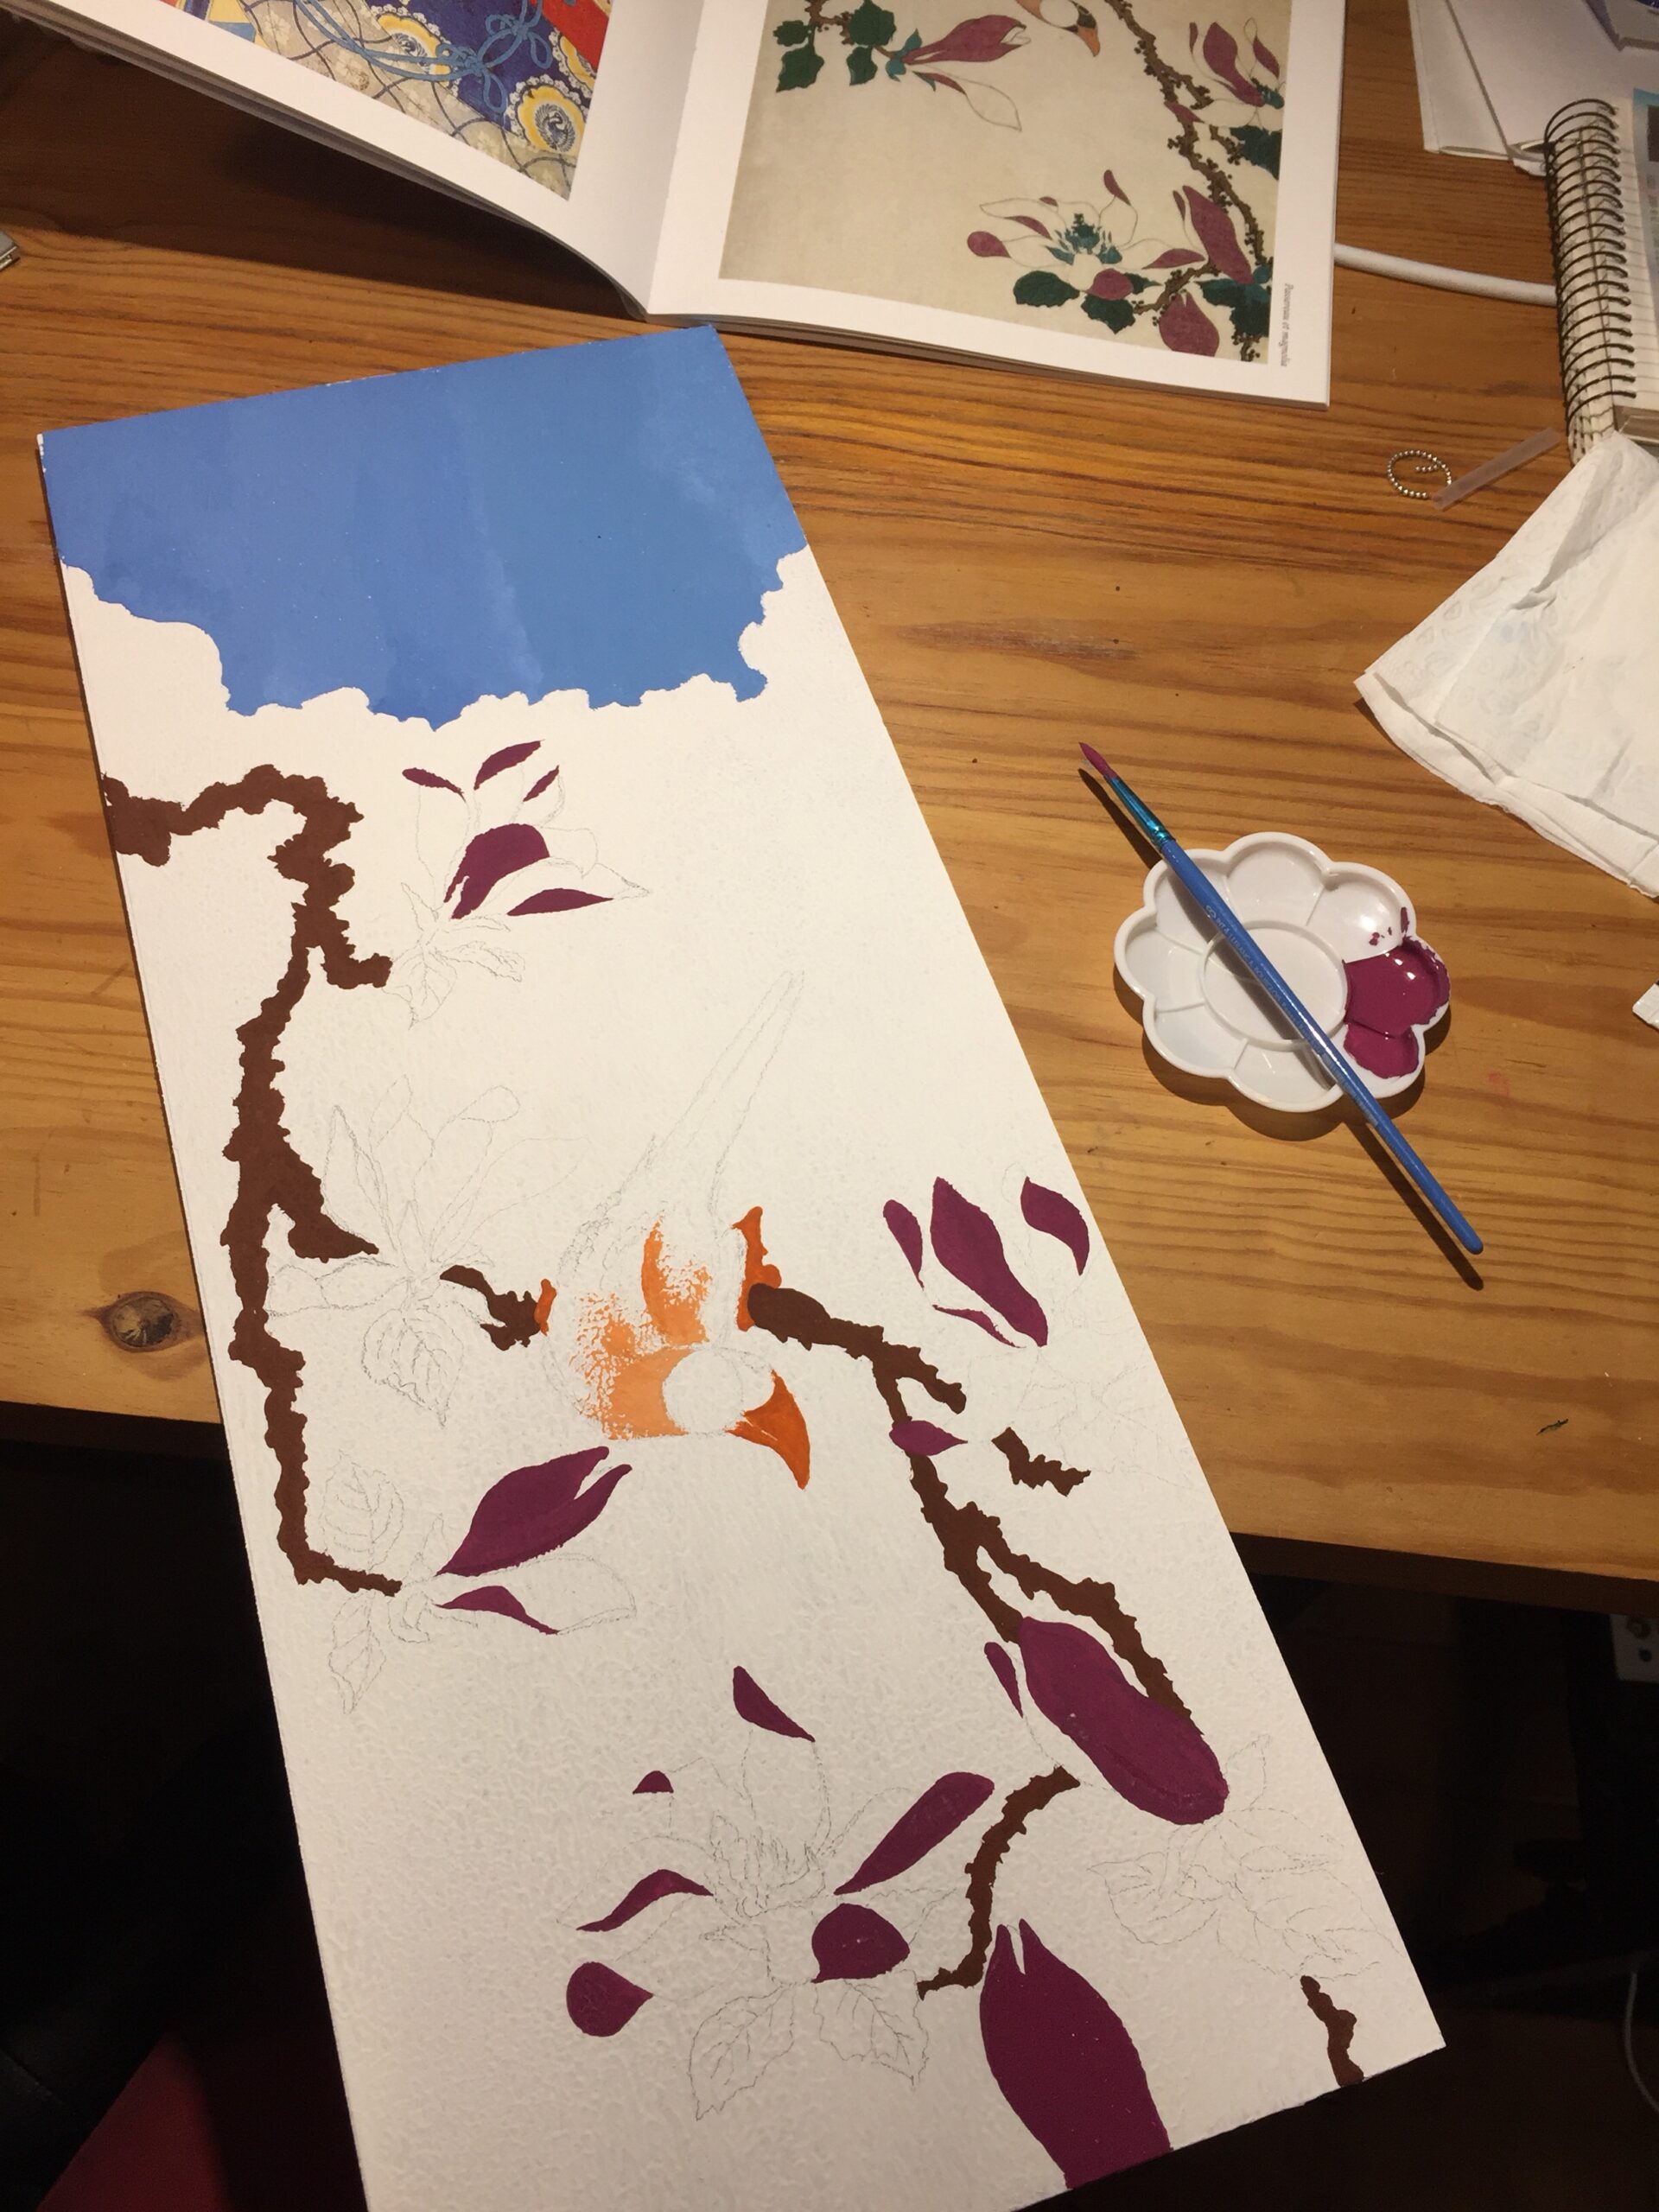 Purple and red gouache paint for the dark petals of the magnolia blossoms. Next to the board is the palette with the paint and the brush I'm using is resting on it.